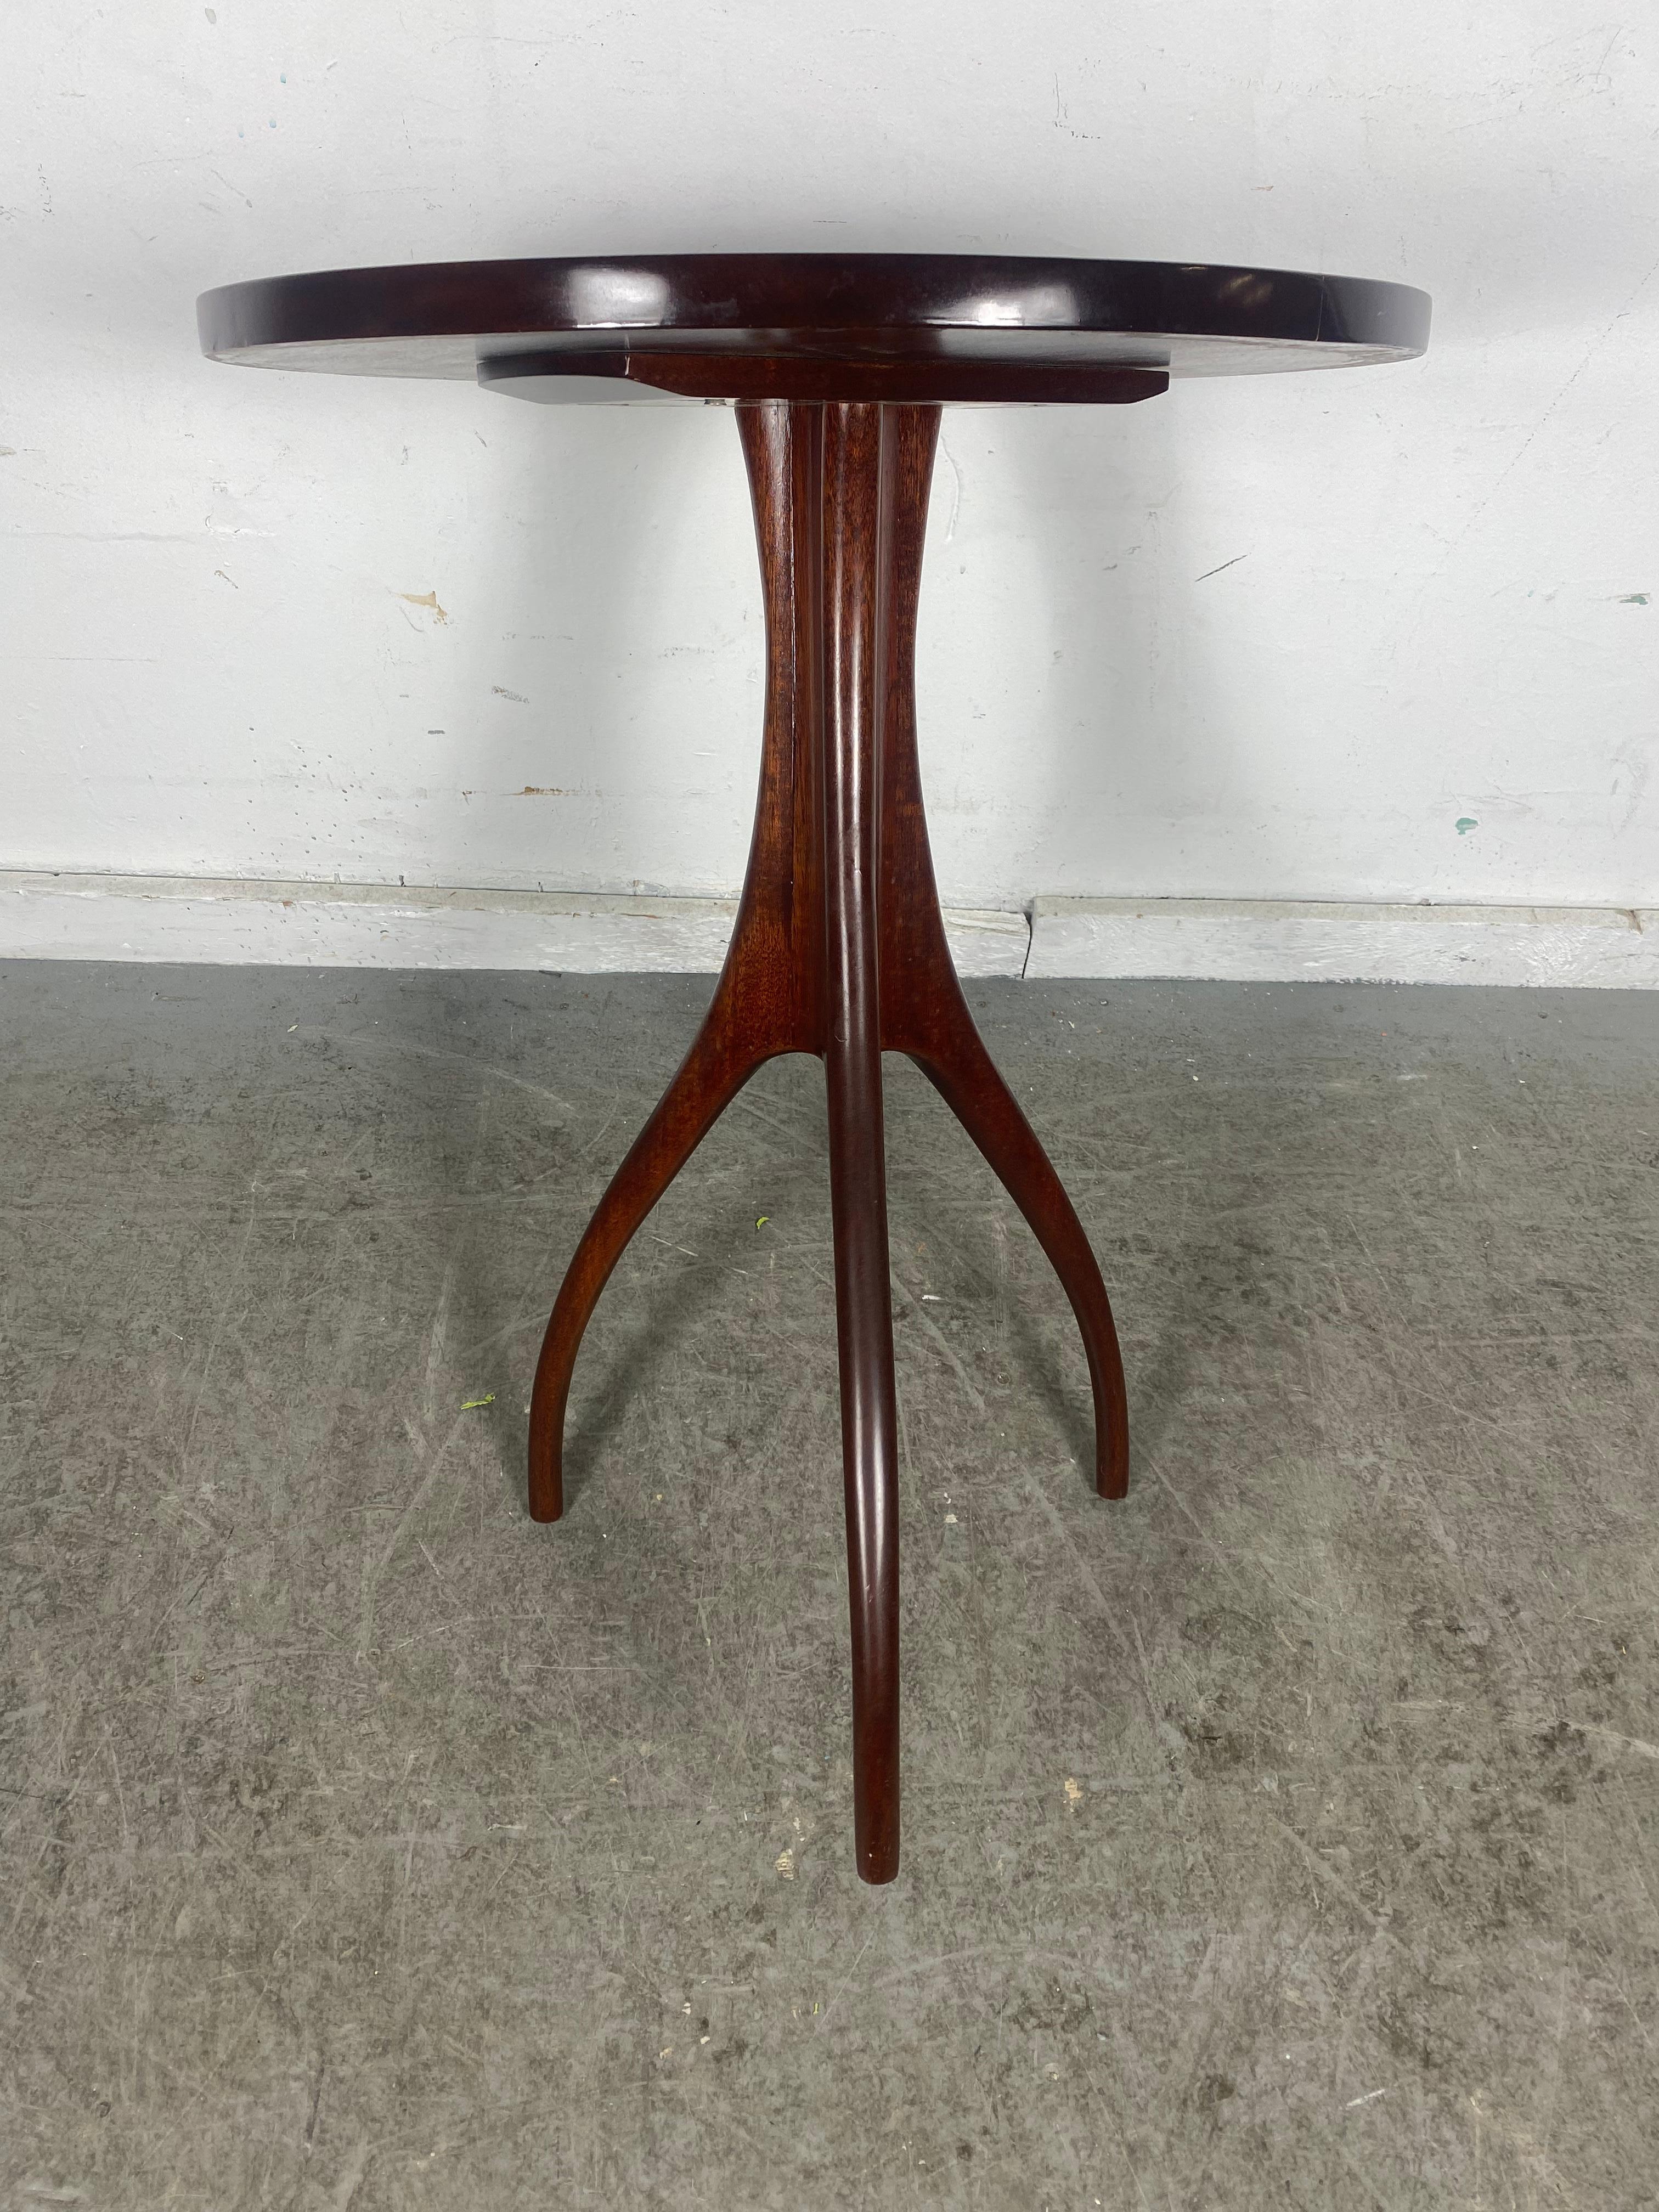 Mid-20th Century Stylish Midcentury Mahogany Tripod Lamp Table / Stand Attrib to Edward Wormley For Sale